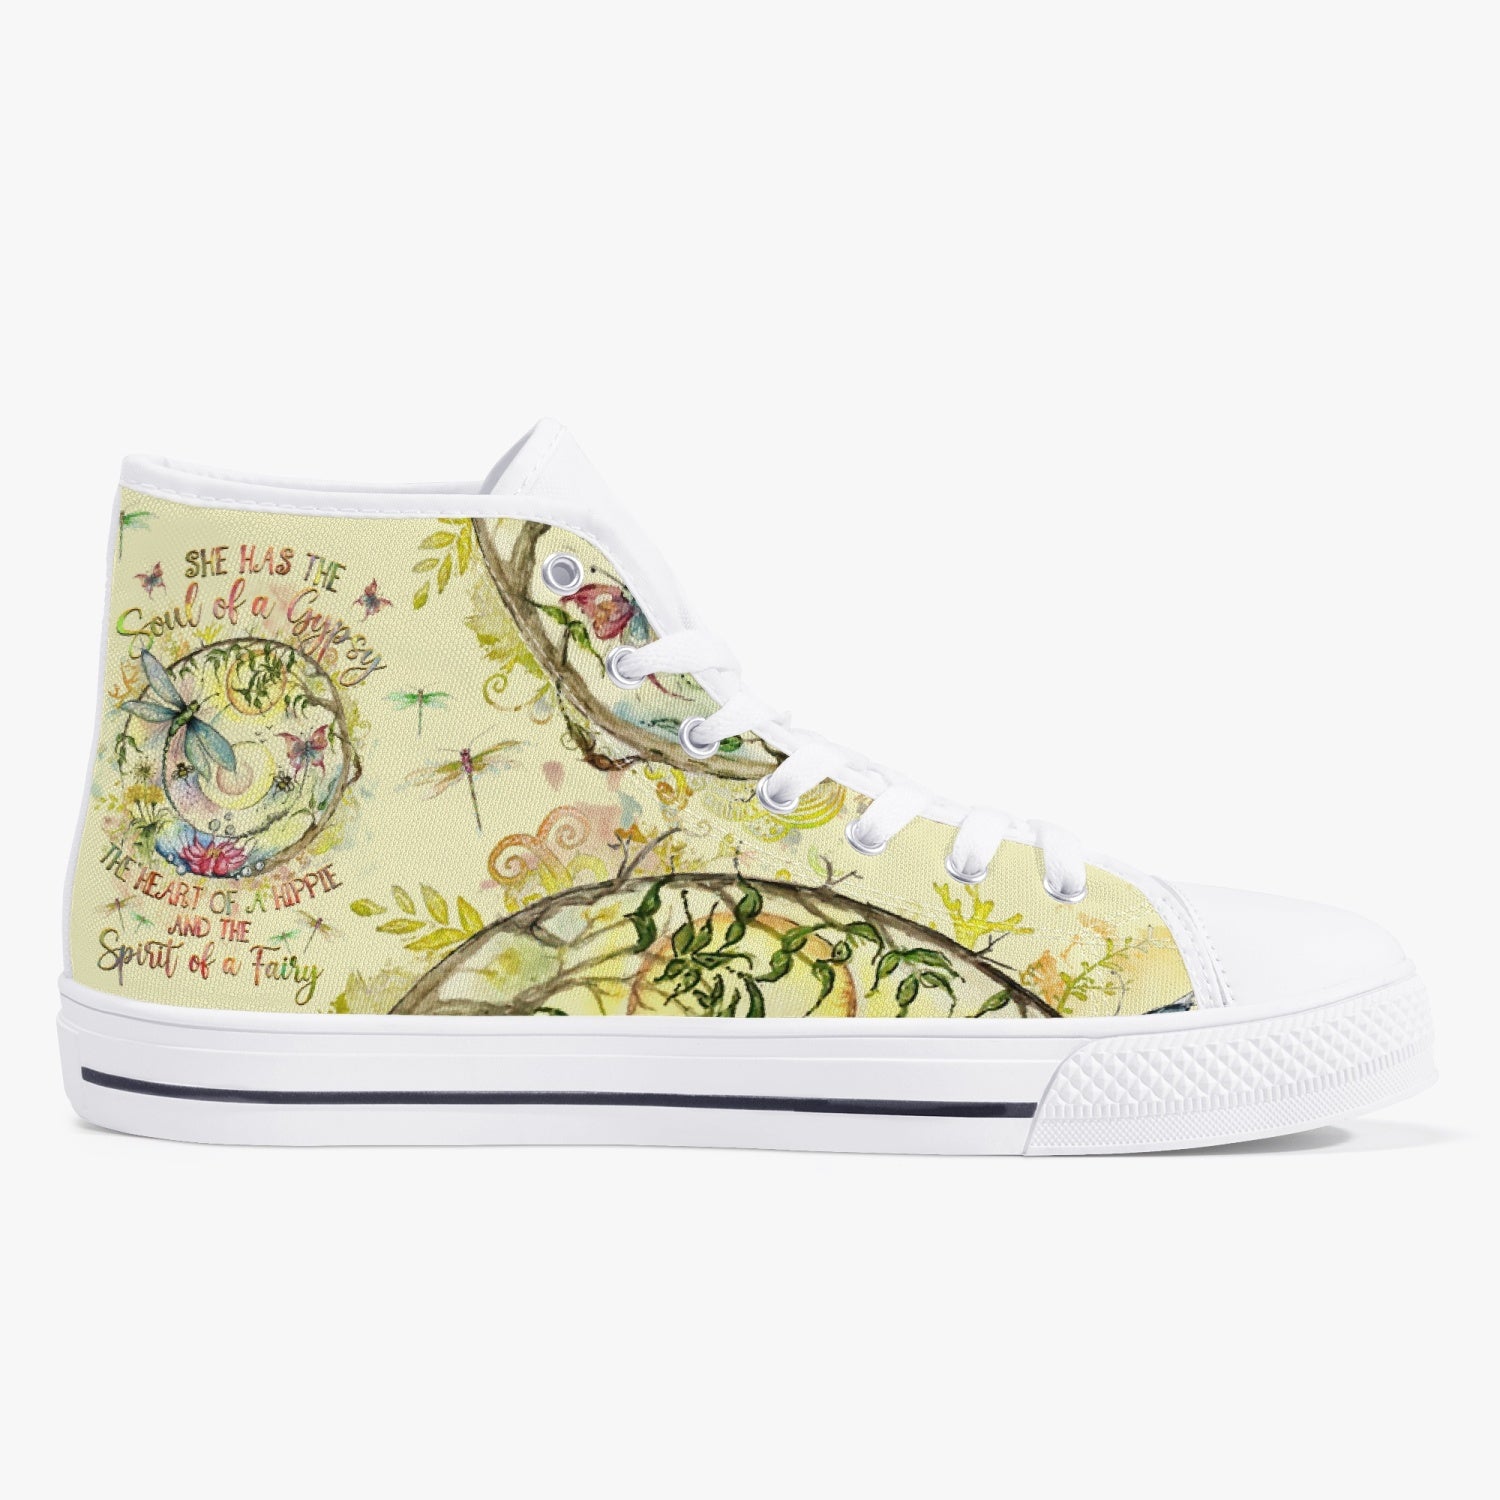 SPIRIT OF A FAIRY DRAGONFLY HIGH TOP CANVAS SHOES - YHHG2308234